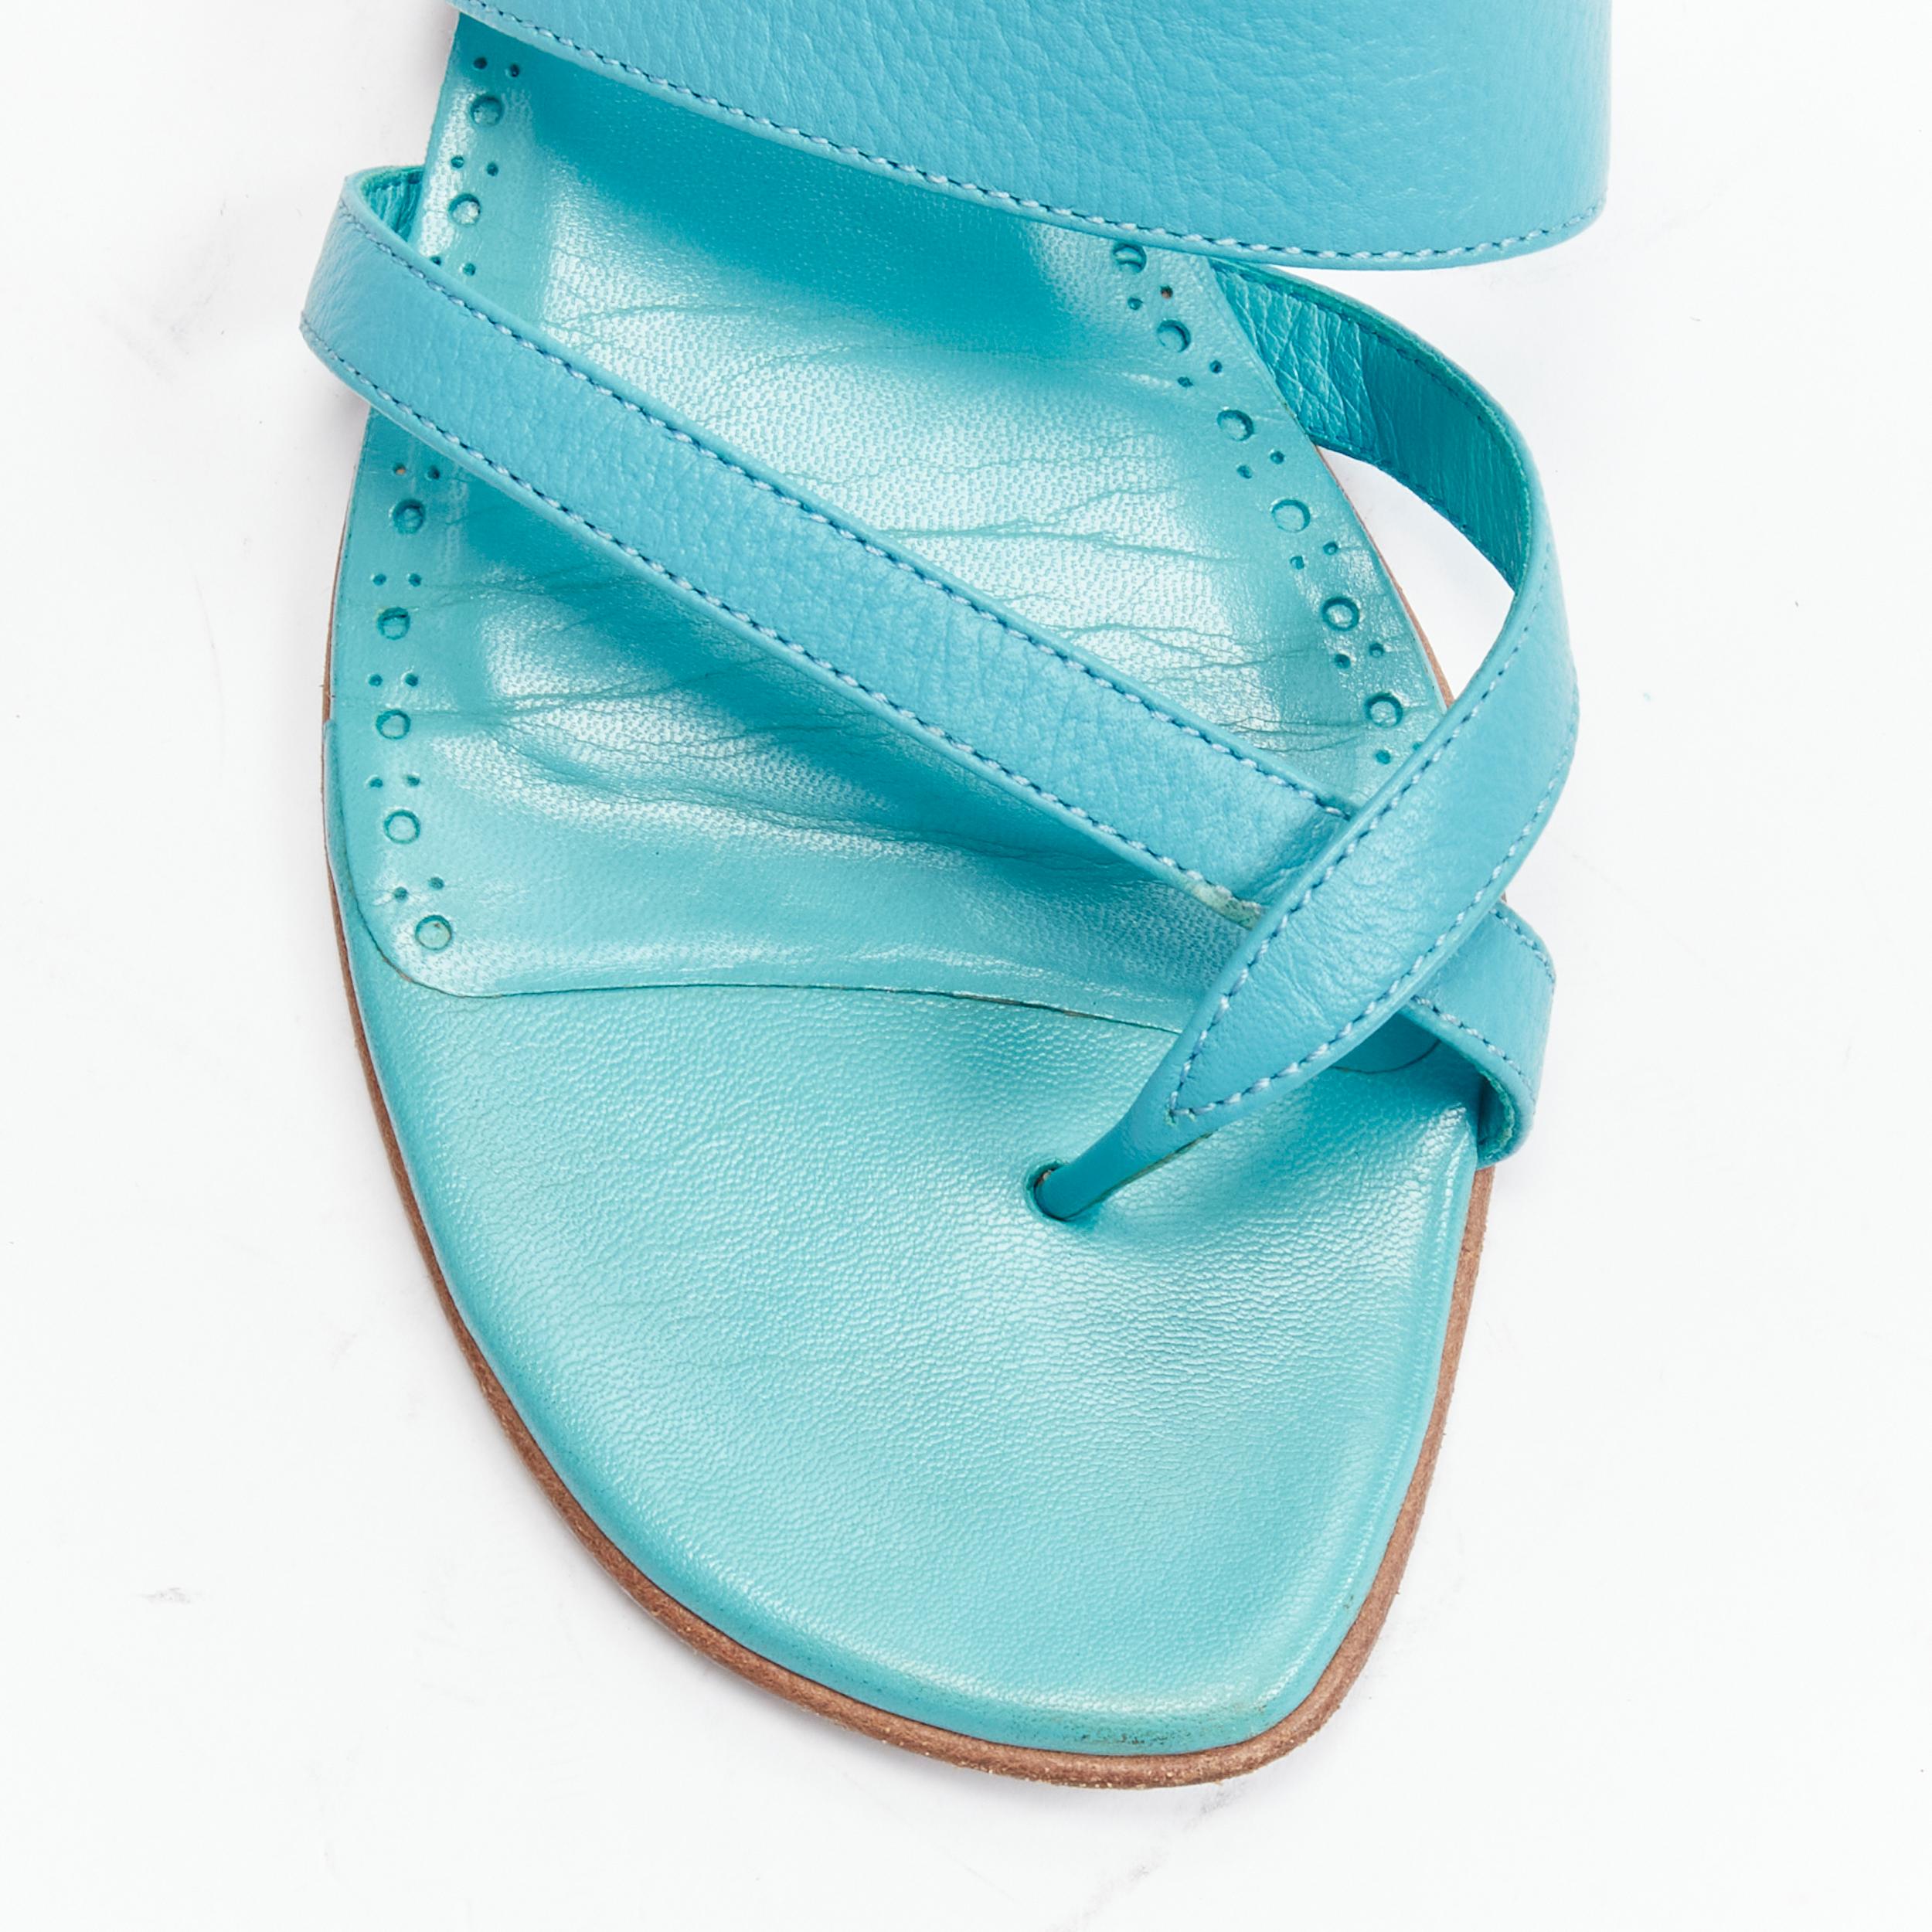 MANOLO BLAHNIK teal blue toe ring crisscross leather strappy sandals EU37.5 For Sale 2